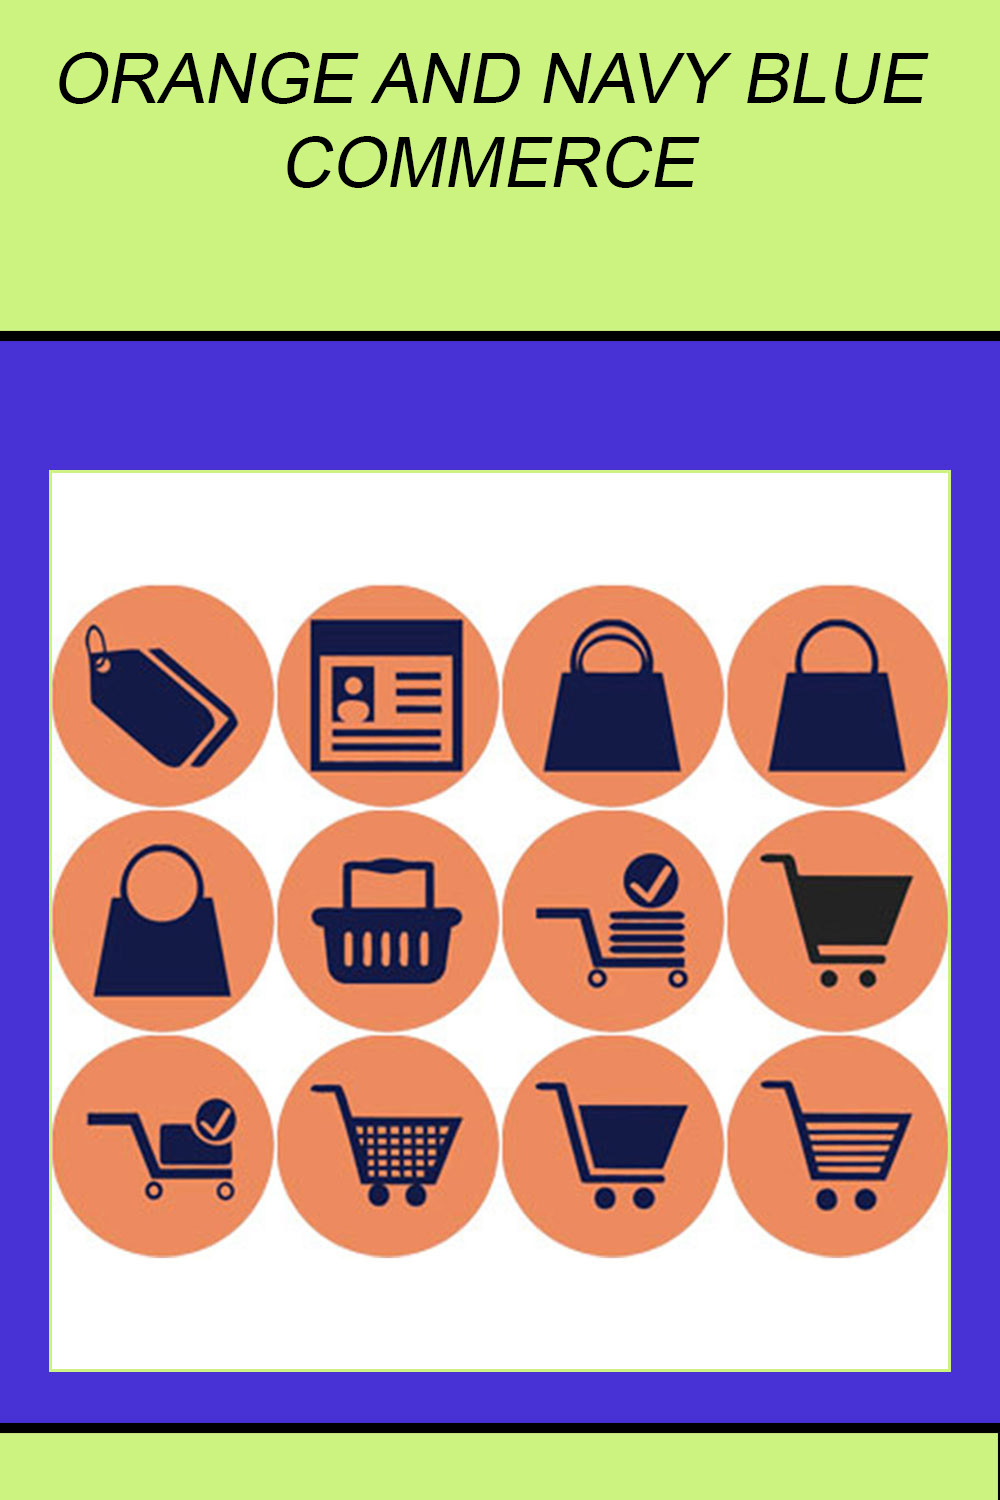 ORANGE AND NAVY BLUE COMMERCE ROUND ICONS pinterest preview image.